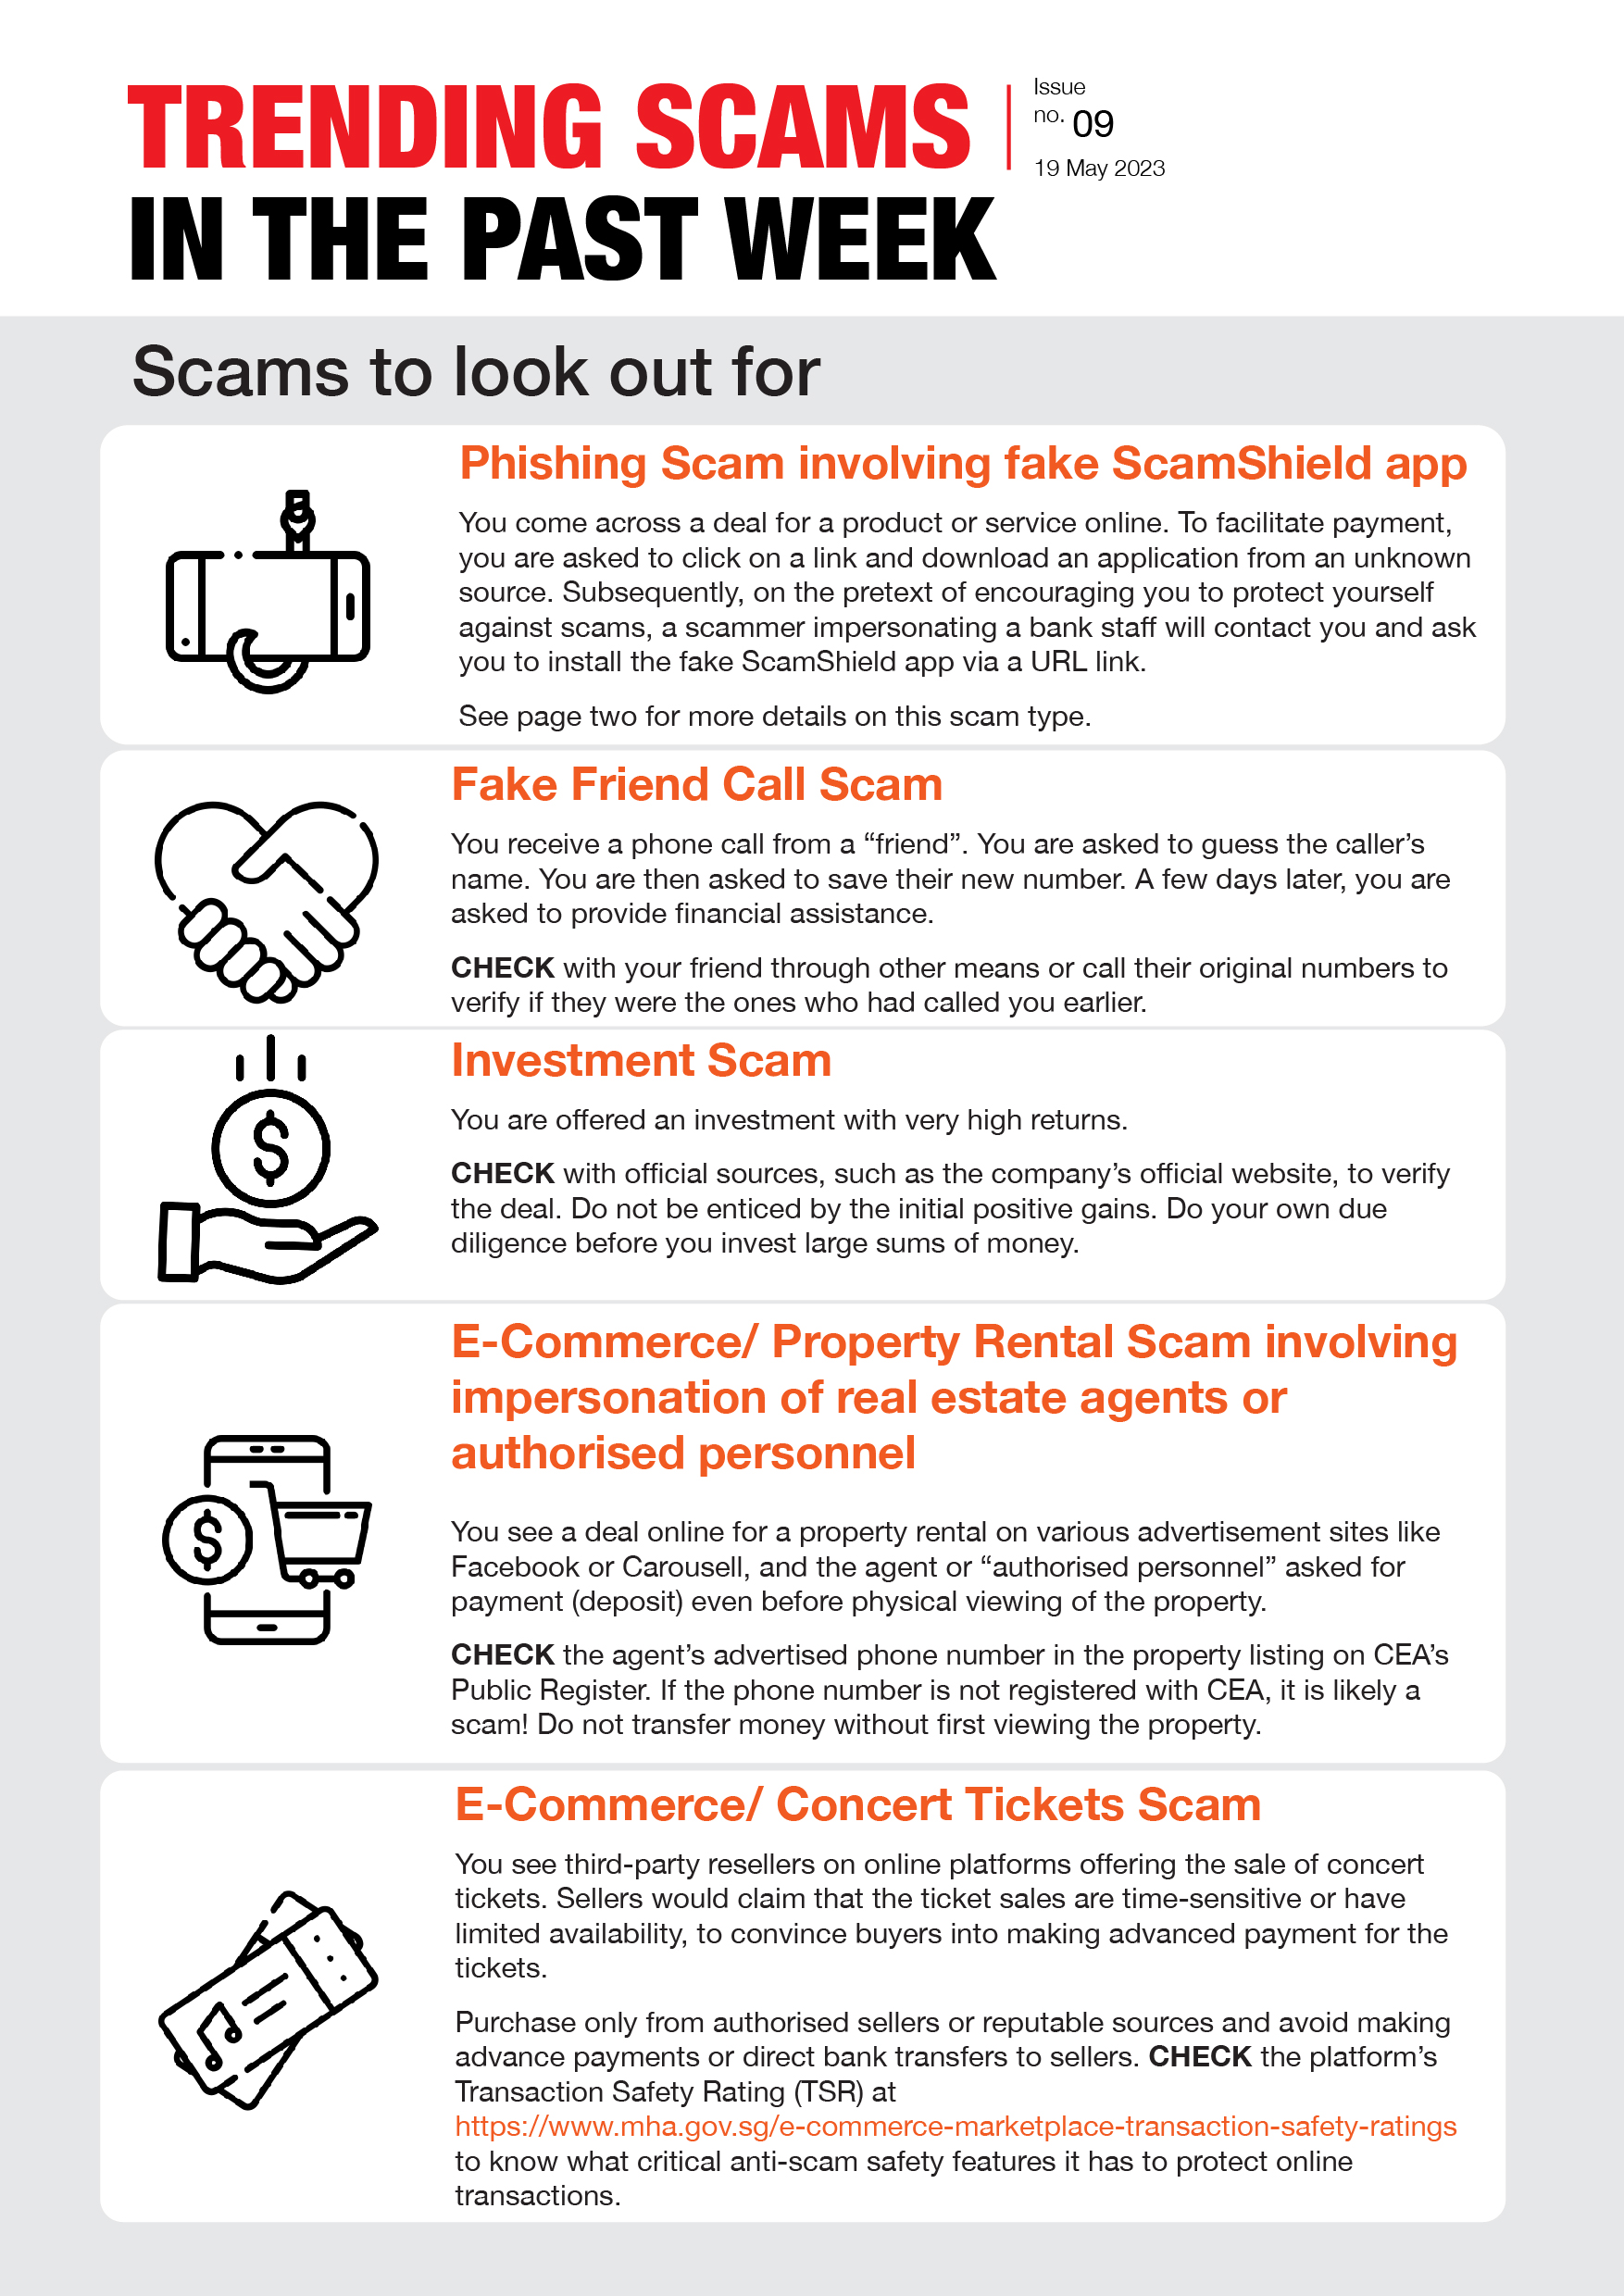 Weekly Bulletin Issue 9 - Scams to look out for